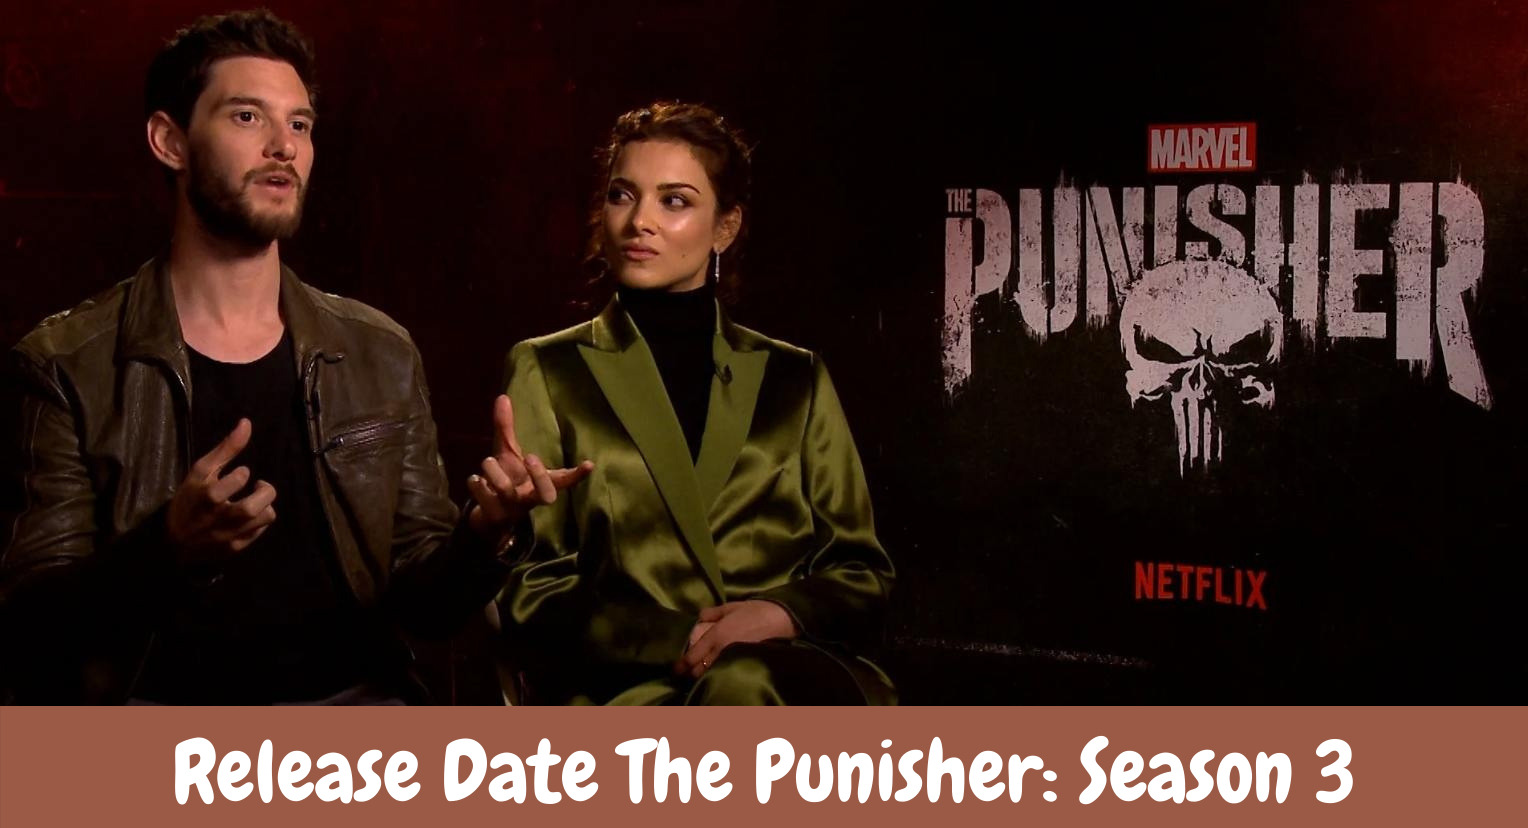 Release Date The Punisher: Season 3